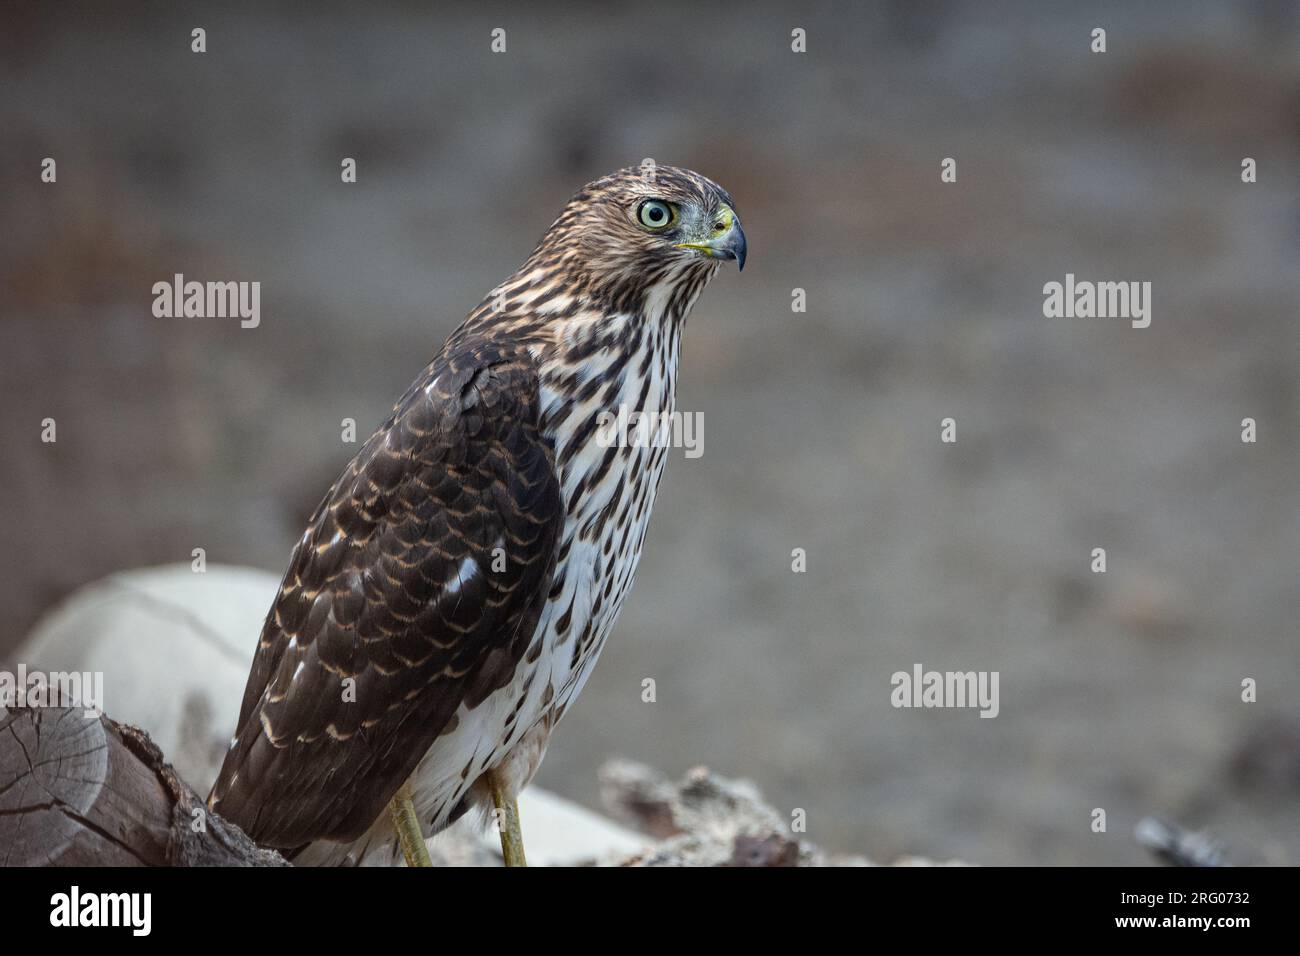 An immature Cooper's hawk (Accipiter cooperii) sits on a tree stump. Stock Photo